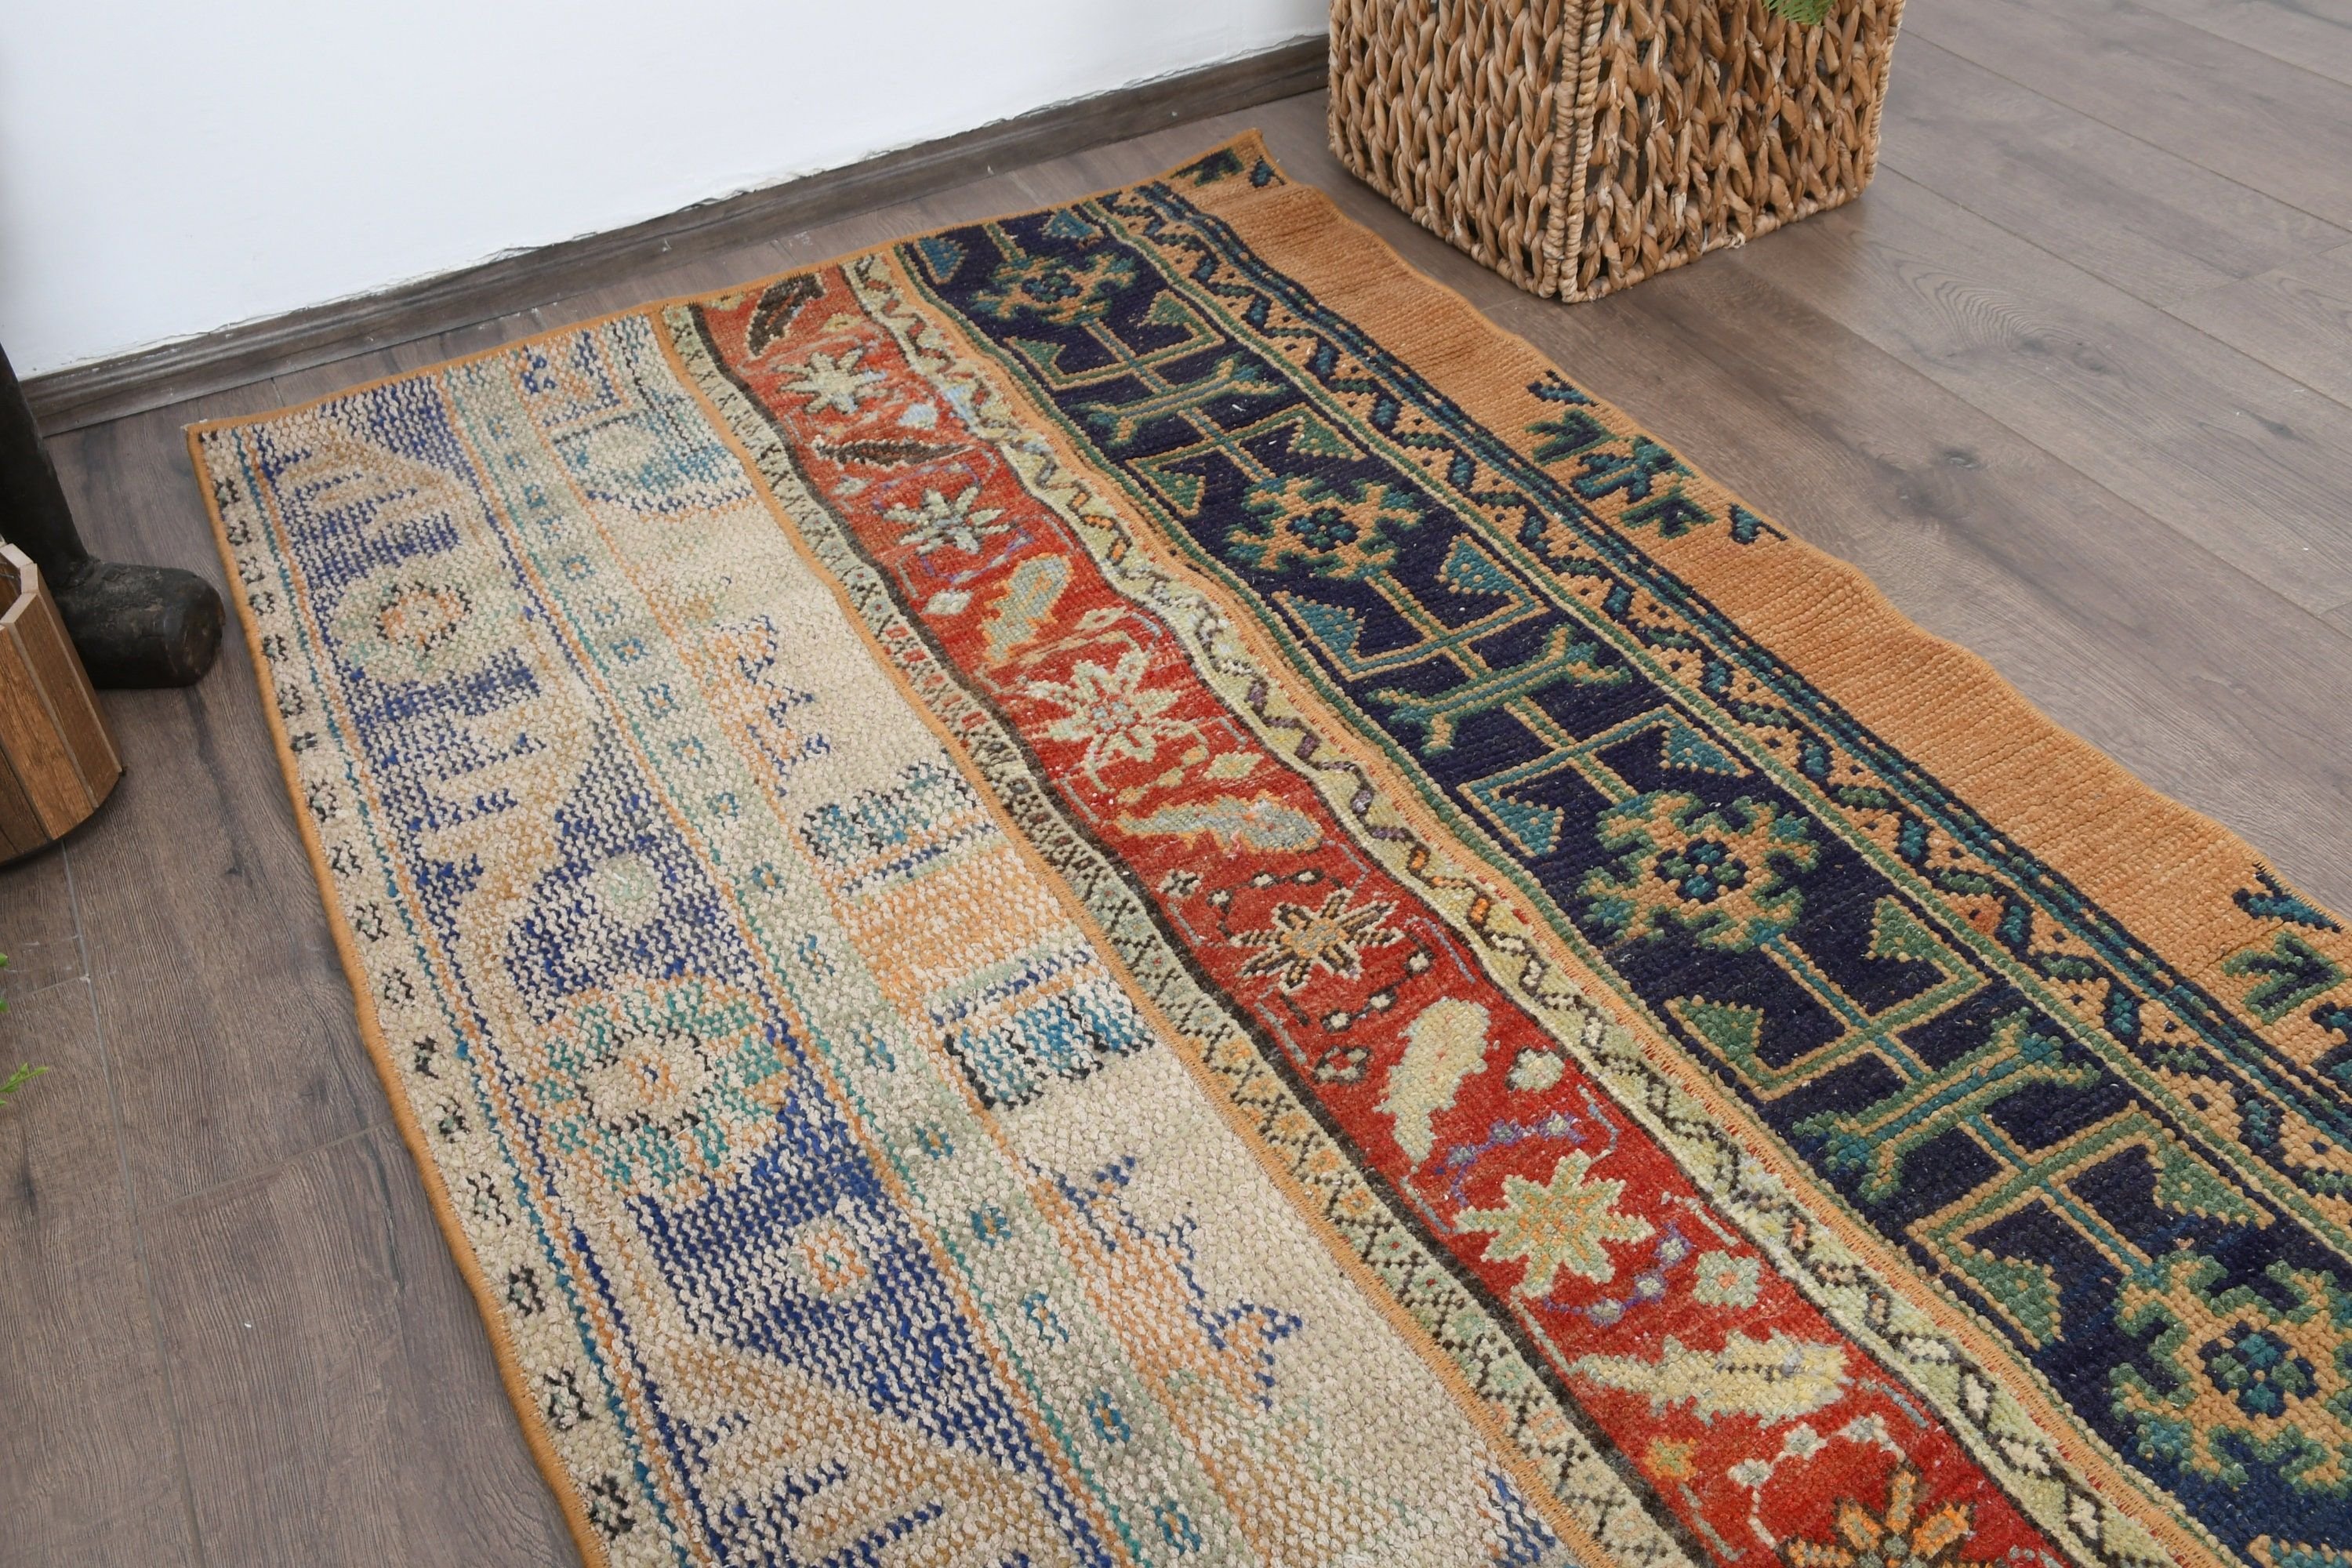 2.7x4.3 ft Small Rugs, Cool Rugs, Car Mat Rug, Anatolian Rug, Turkish Rugs, Blue Oriental Rugs, Vintage Rug, Bath Rug, Rugs for Kitchen